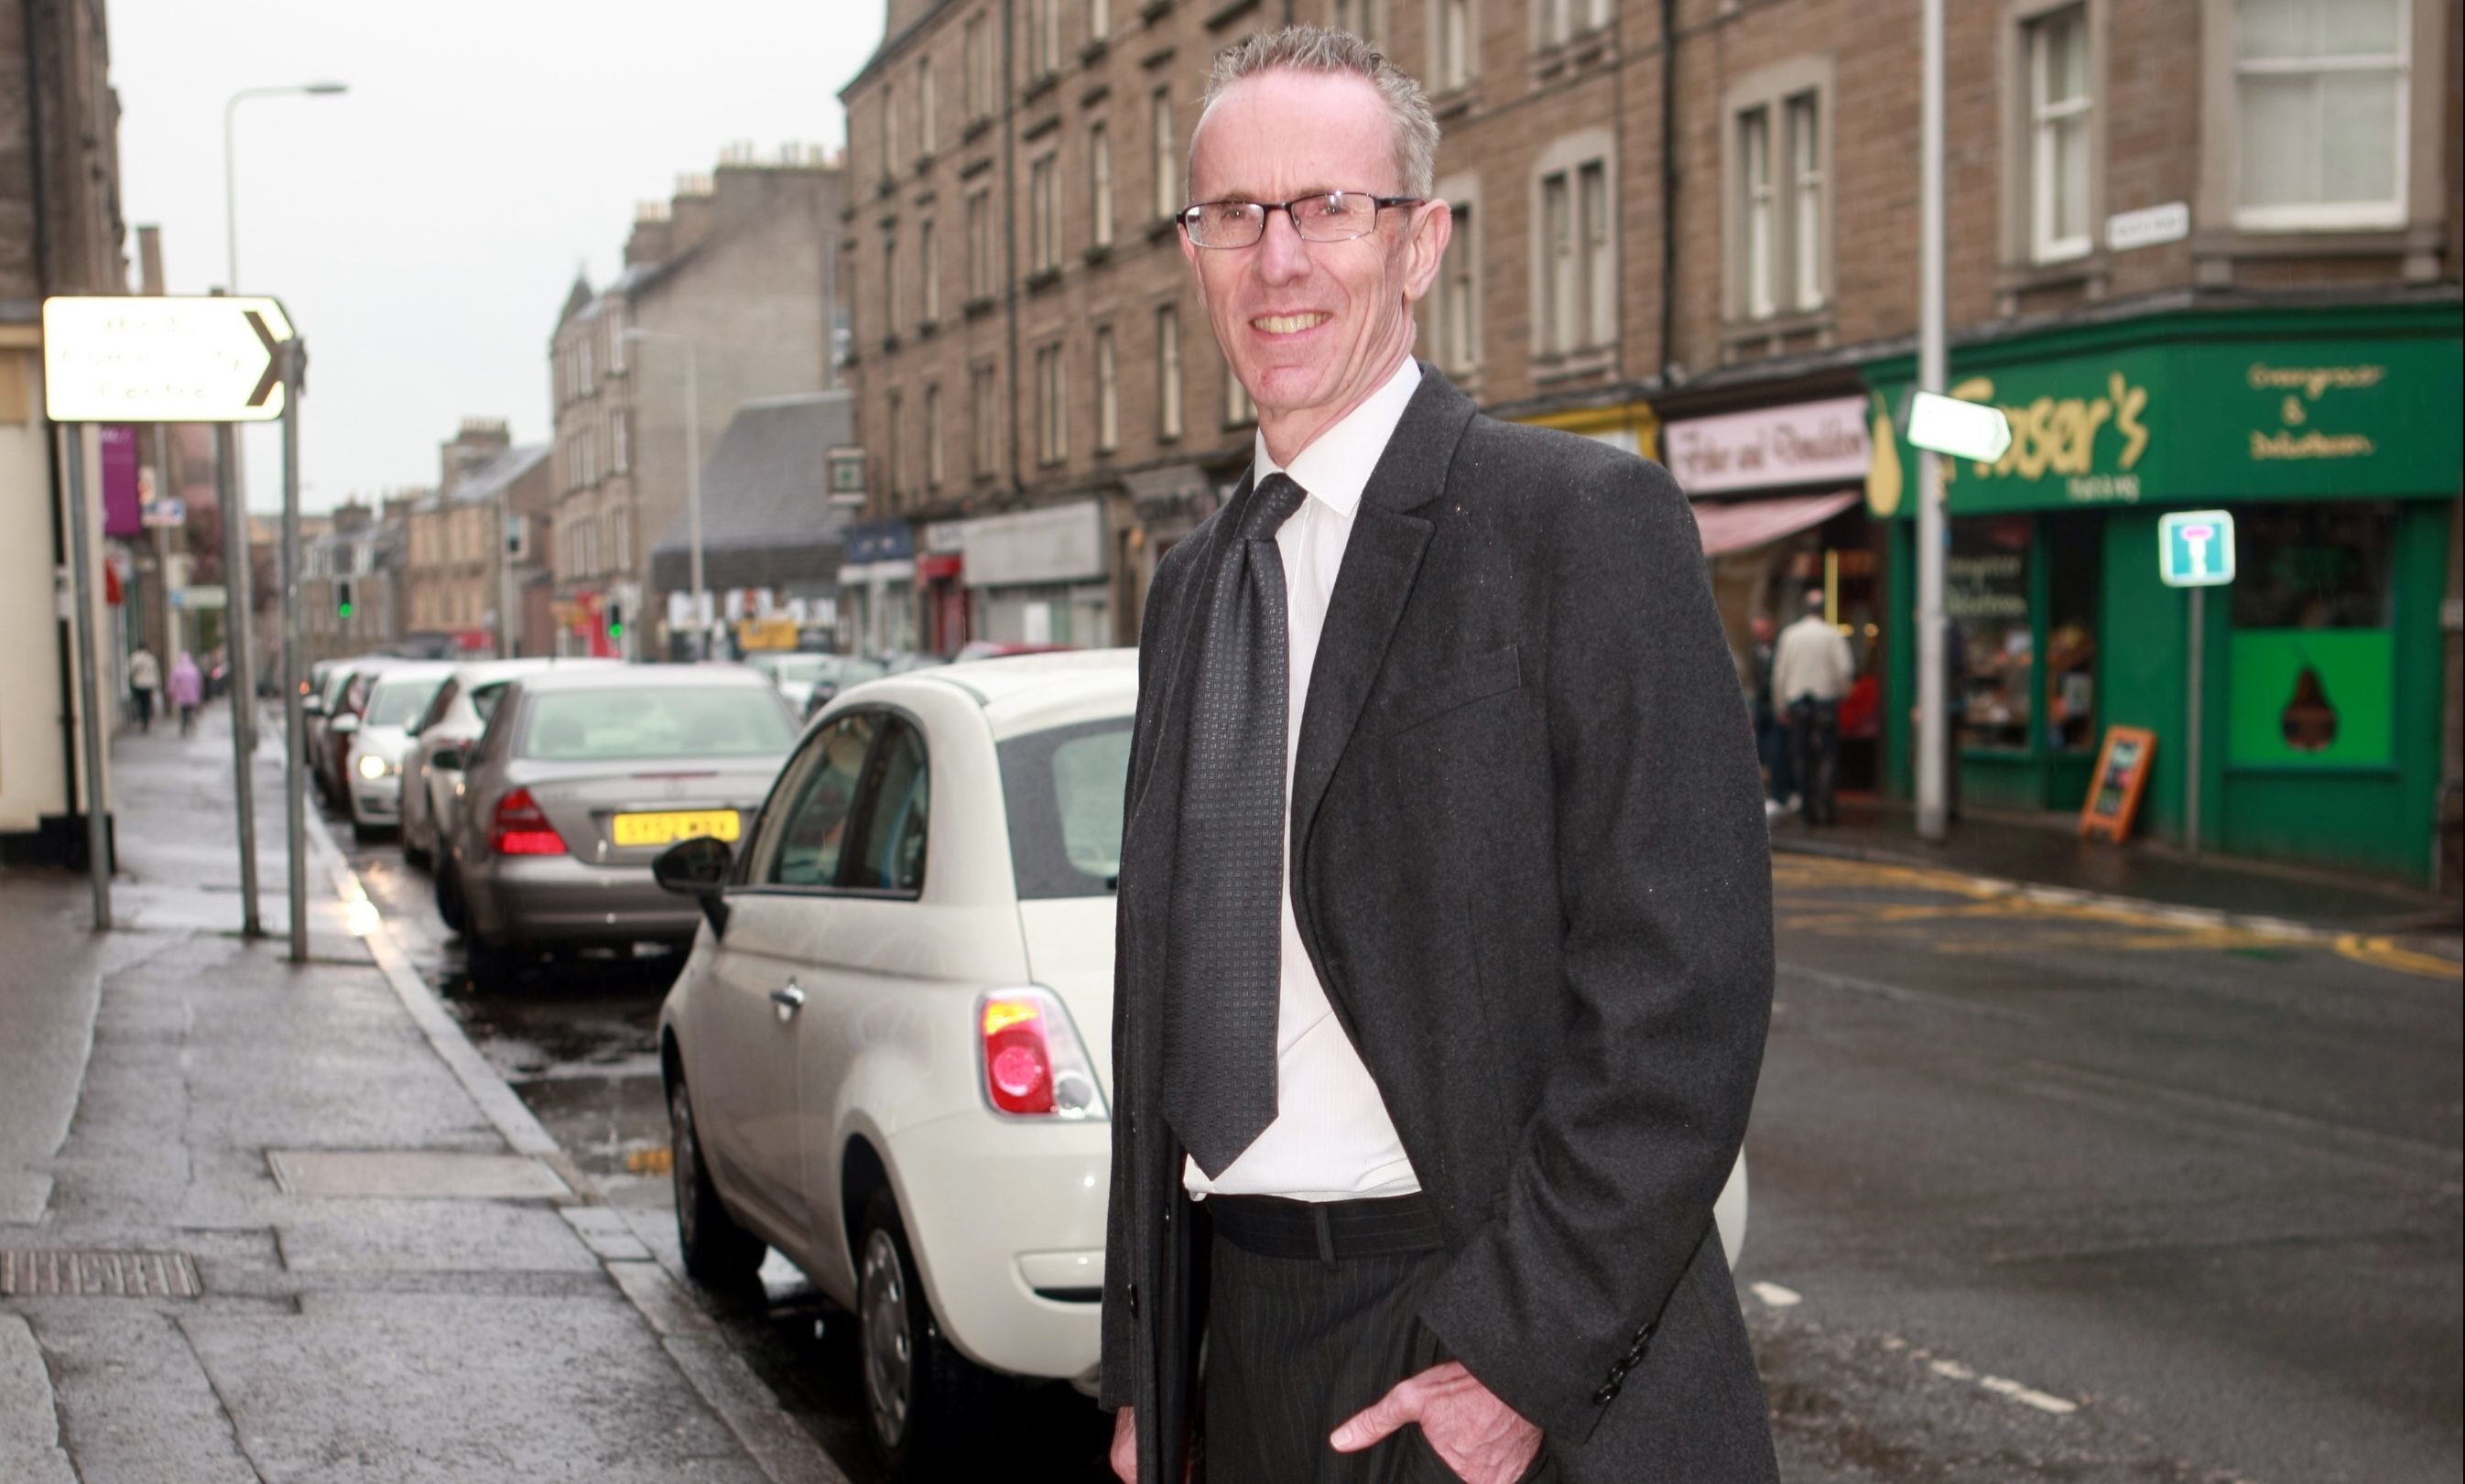 Mr Macpherson wants priority parking for West End residents.